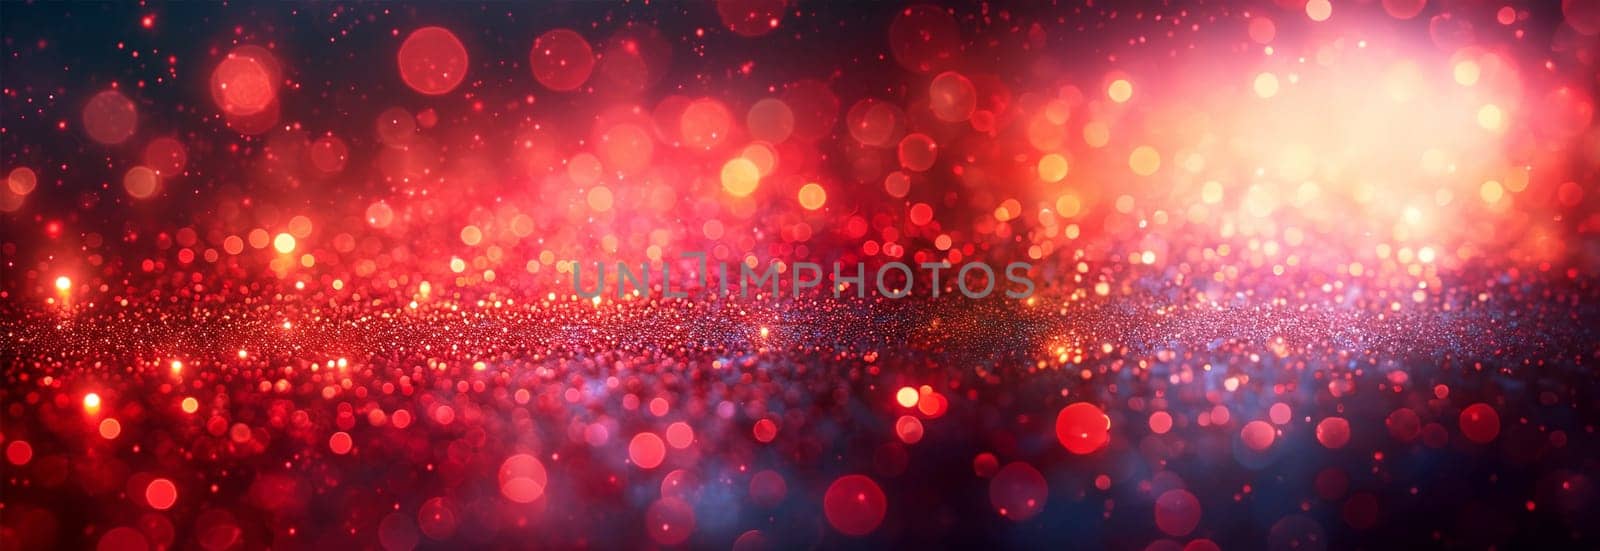 Banner Gold and red particles waves glittering. Red sparkles glitter and rays lights bokeh abstract holiday background texture. Festive abstract design by Annebel146